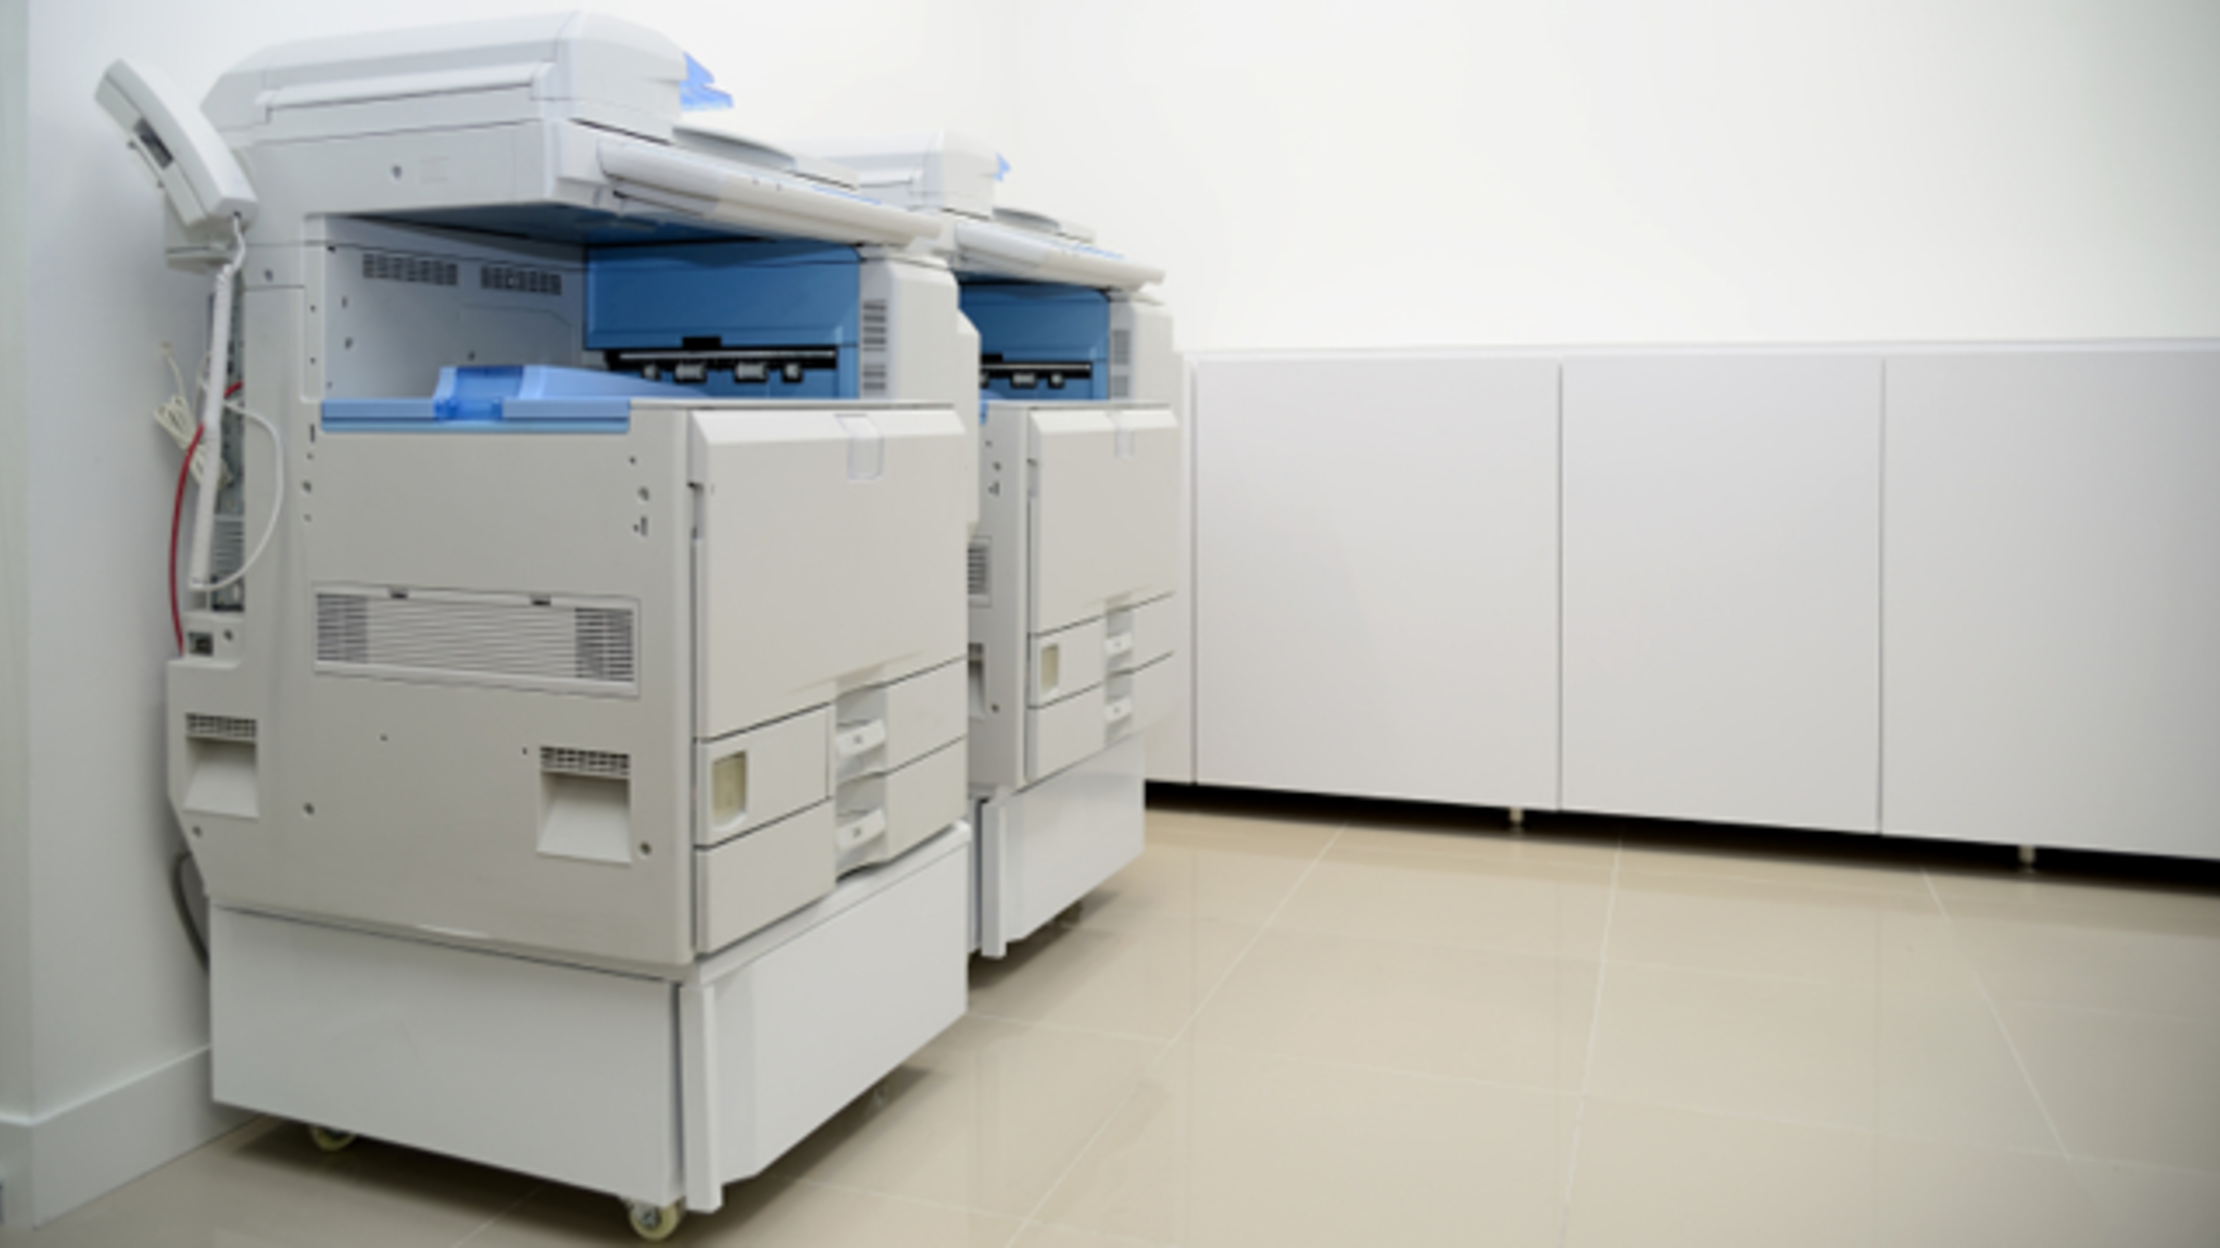 Xerox Introduces a Copier That Translates as It Copies | Mental Floss